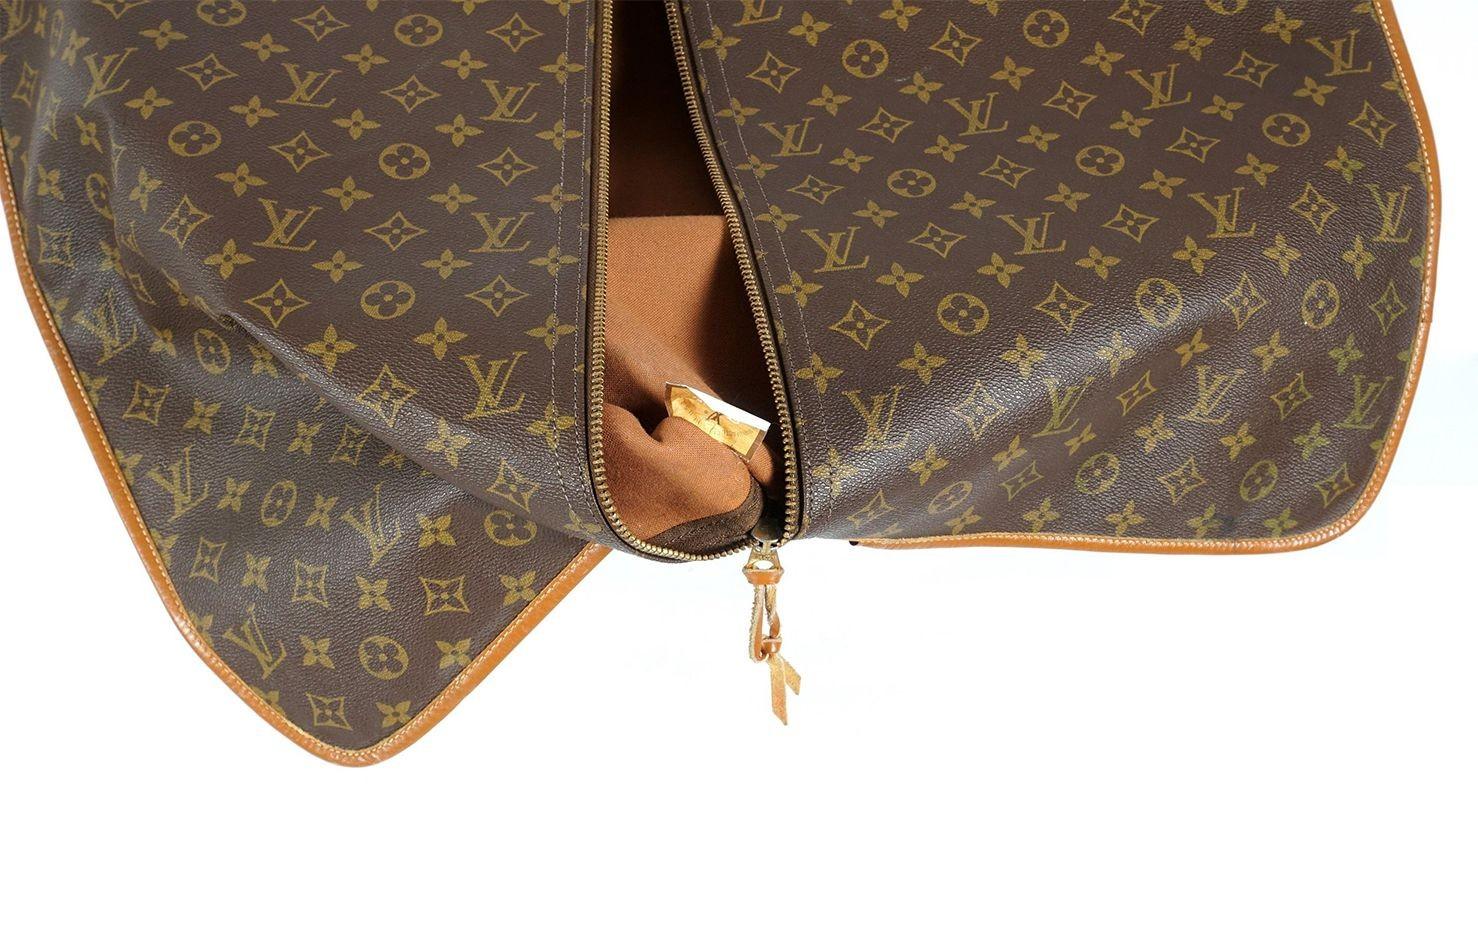 Rare Vintage Louis Vuitton Garment Bag, c. 1990's In Good Condition For Sale In Los Angeles, CA